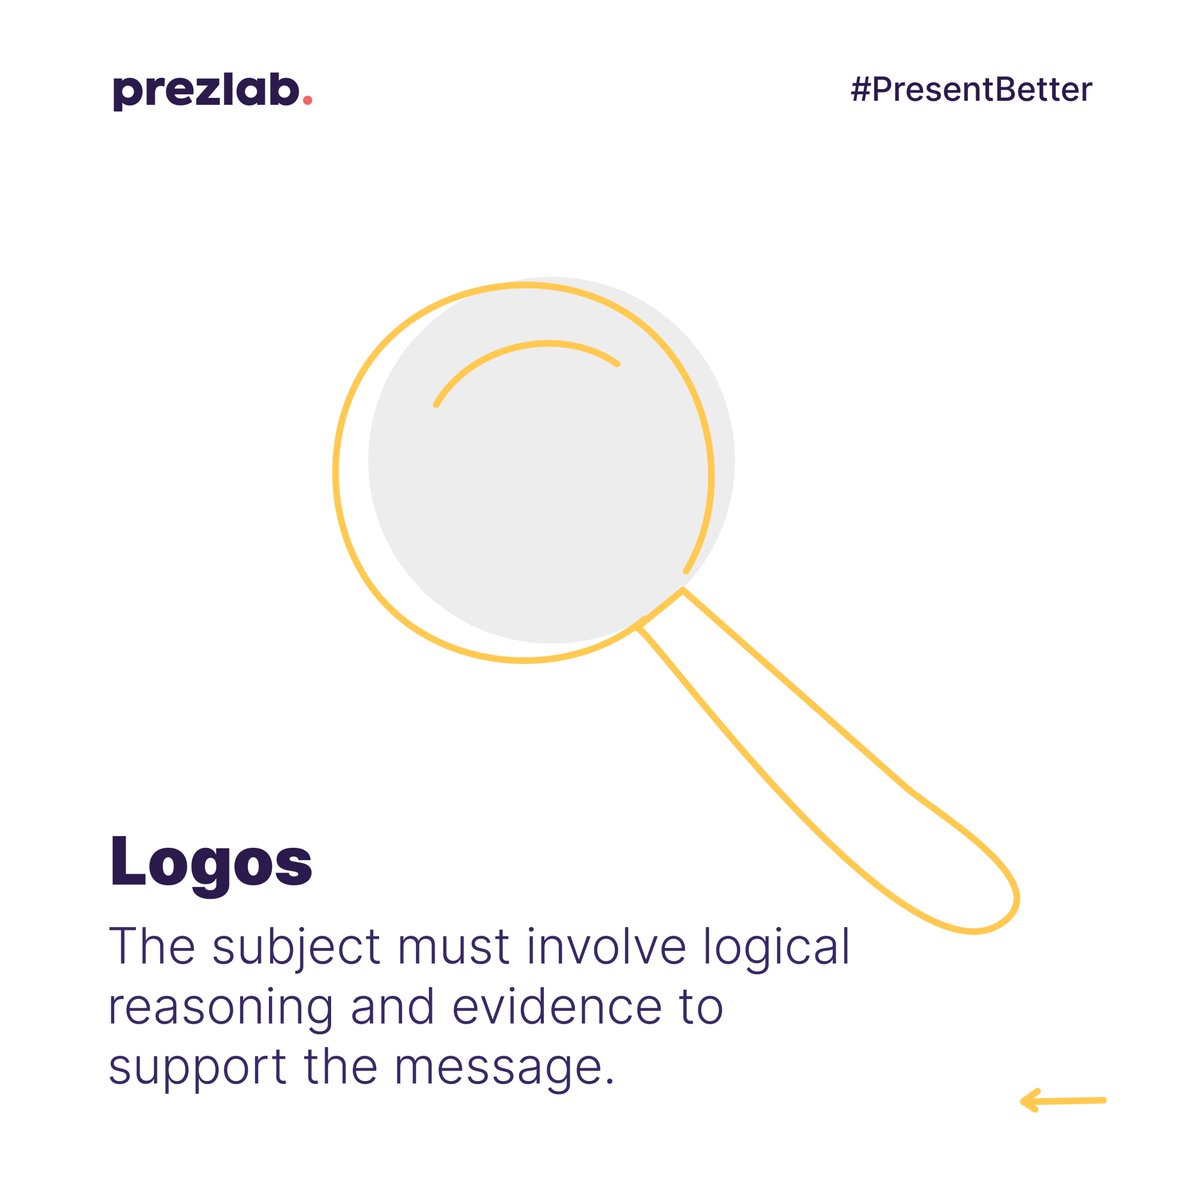 Aristotle believed that presenters can maximize persuasion by building an argument grounded in credibility✨ logical appeal🧠 and emotional connection❤️
 
#Prezlab #AddPowerToYourPoint #PresentBetter #PresentationDesign #PresentationDesignAgency #EngagingPresentations